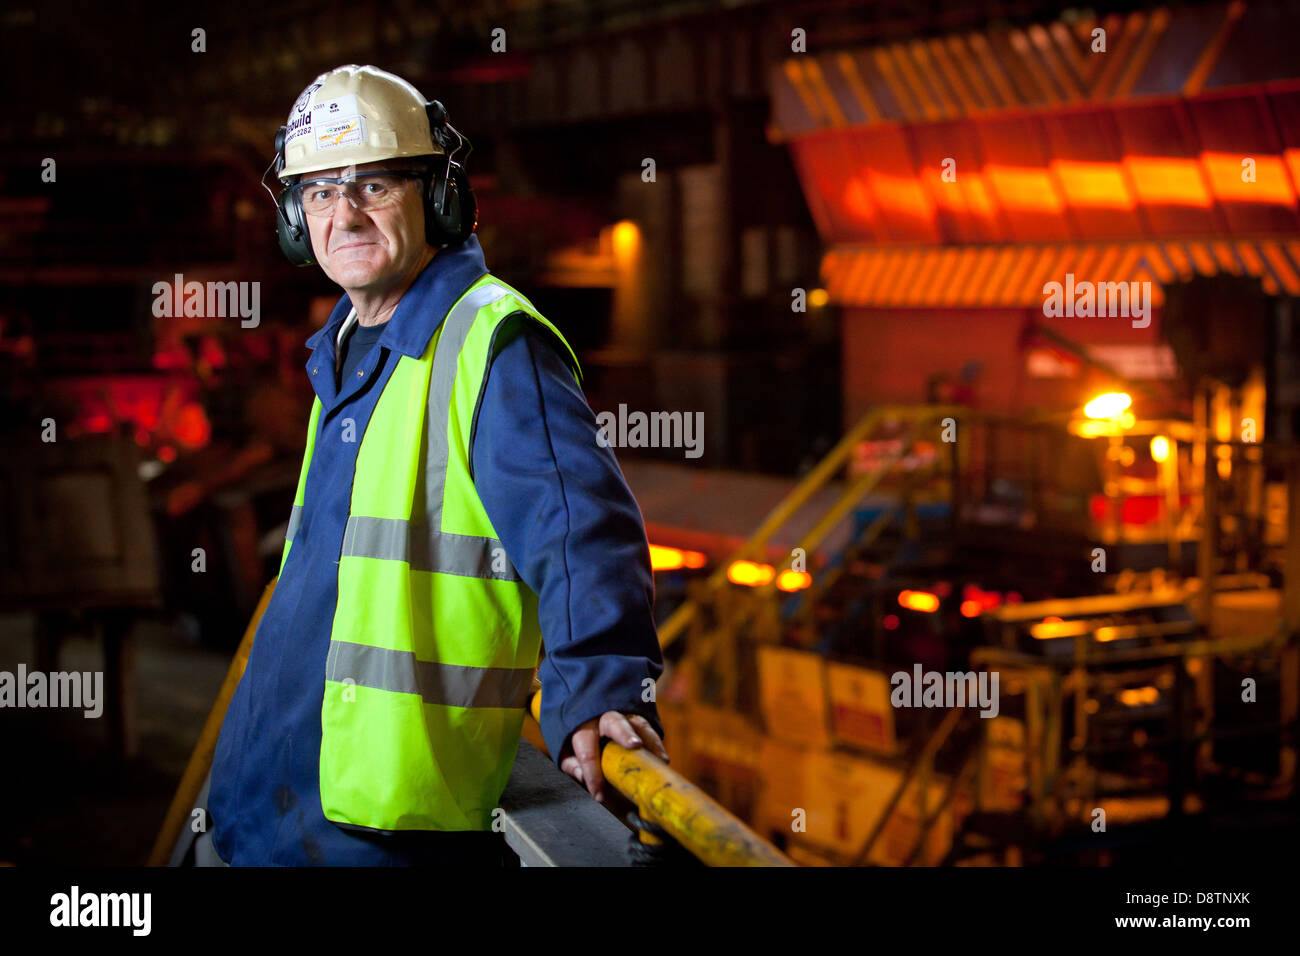 Robert Bizzel, FD of Tata Steel Strip products photographed at the Tata Steel Works, Port Talbot, South Wales Stock Photo